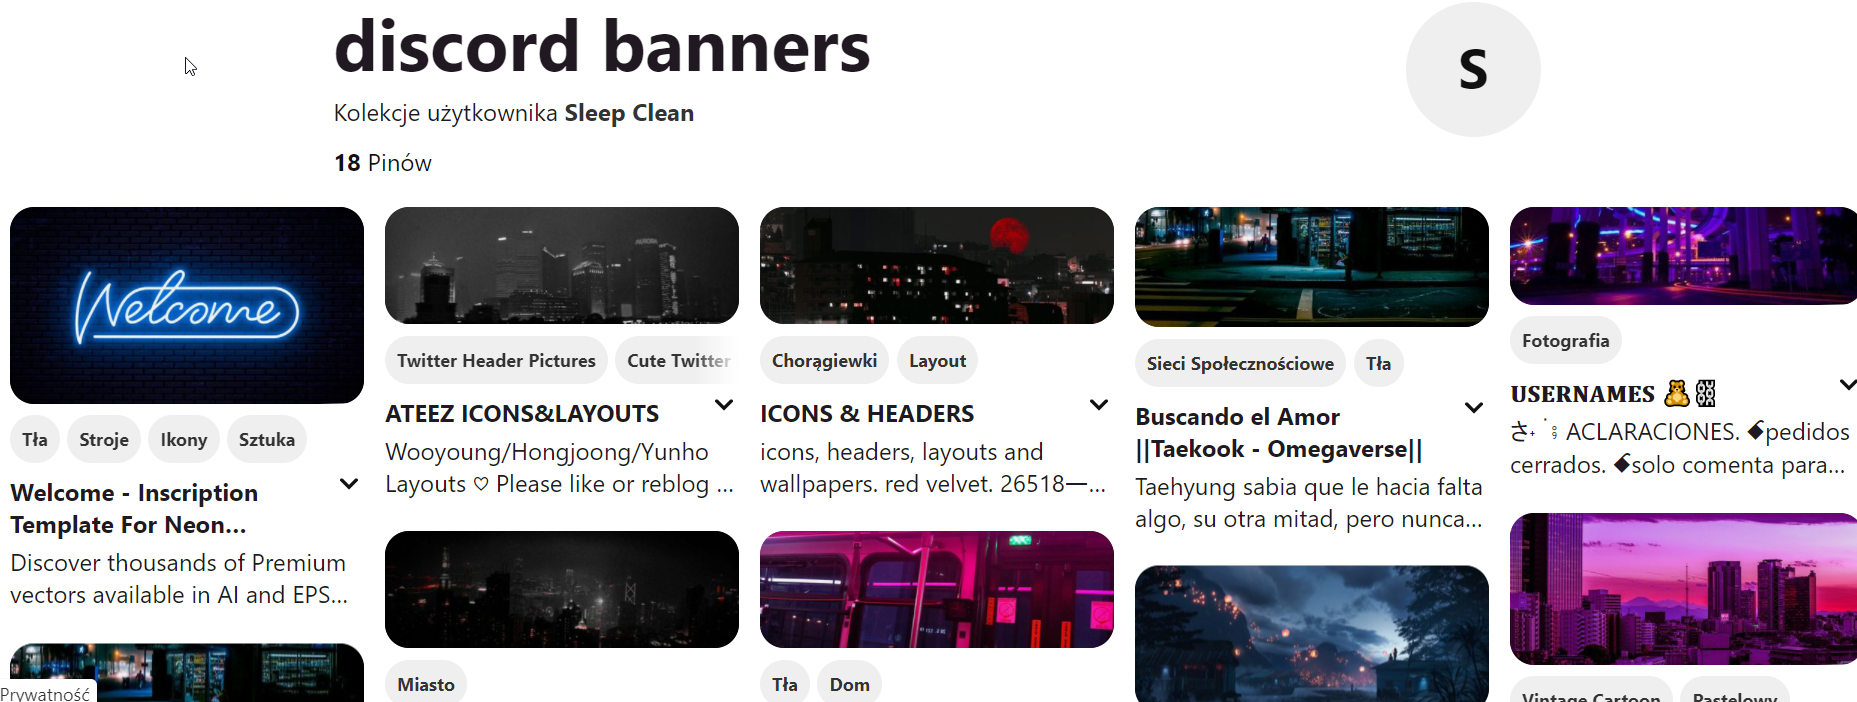 example of discord banners on pinterest